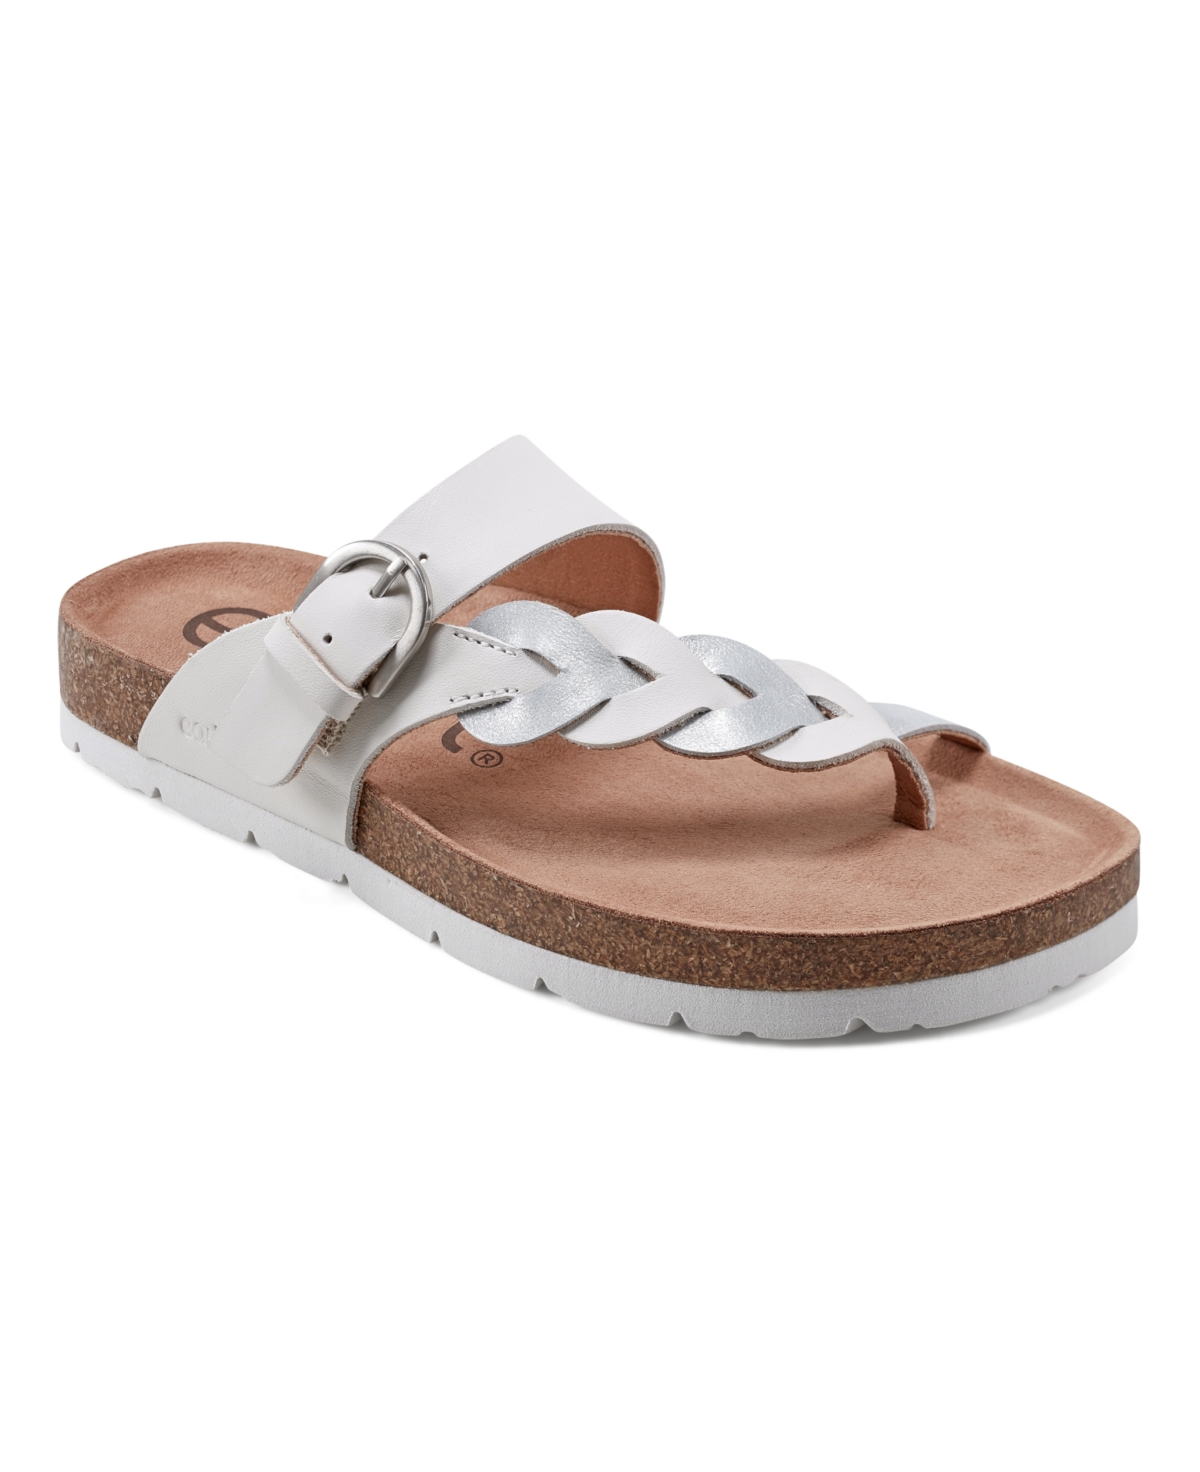 Earth Women's Alyce Round Toe Footbed Slip-On Casual Sandals - Cream, Silver Leather